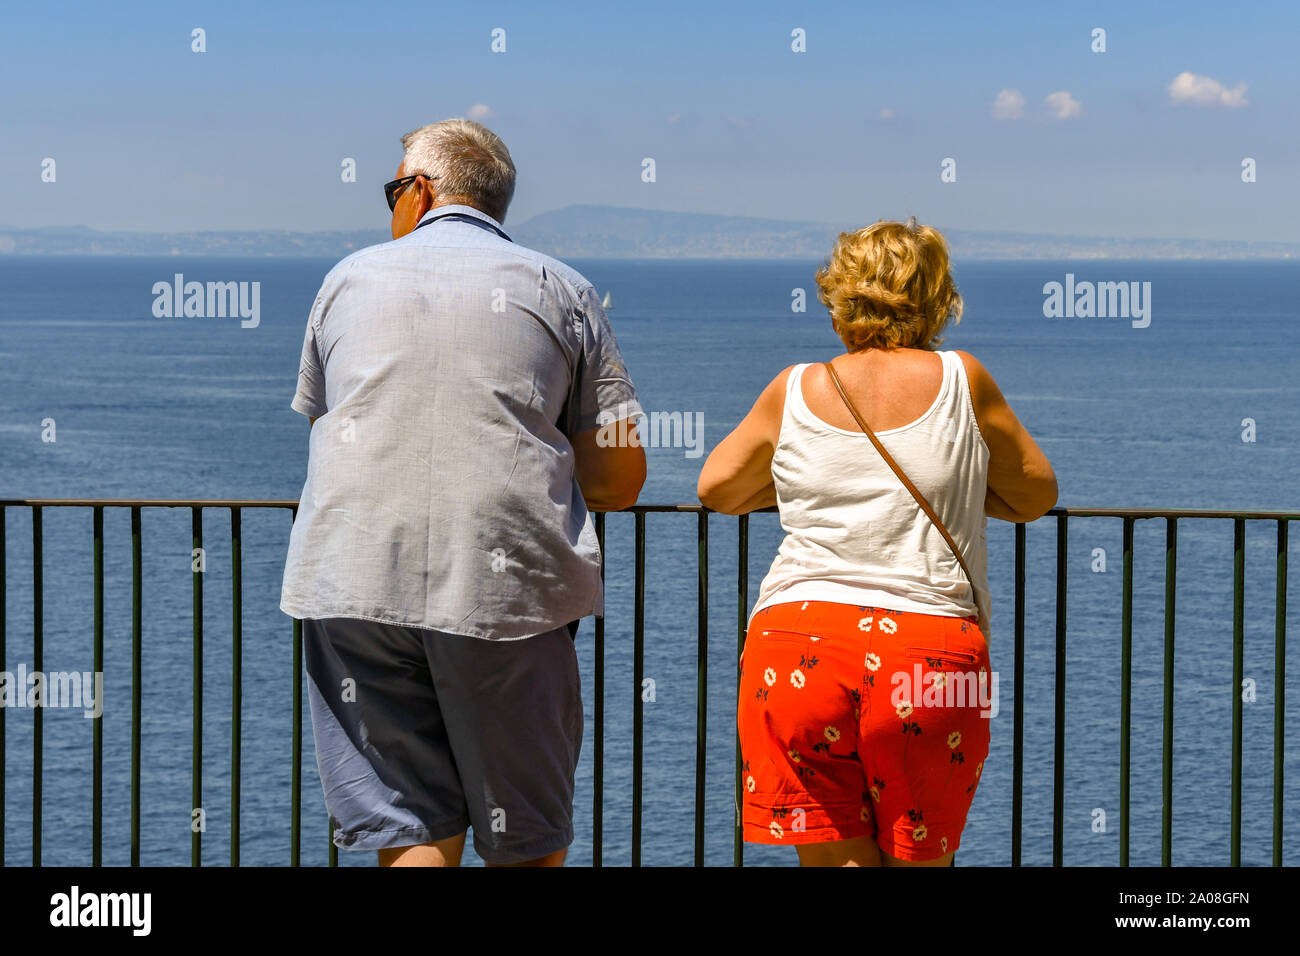 SORRENTO, ITALY - AUGUST 2019: Man and woman leaning on metal railings on the clifftop in Sorrento looking out to sea Stock Photo